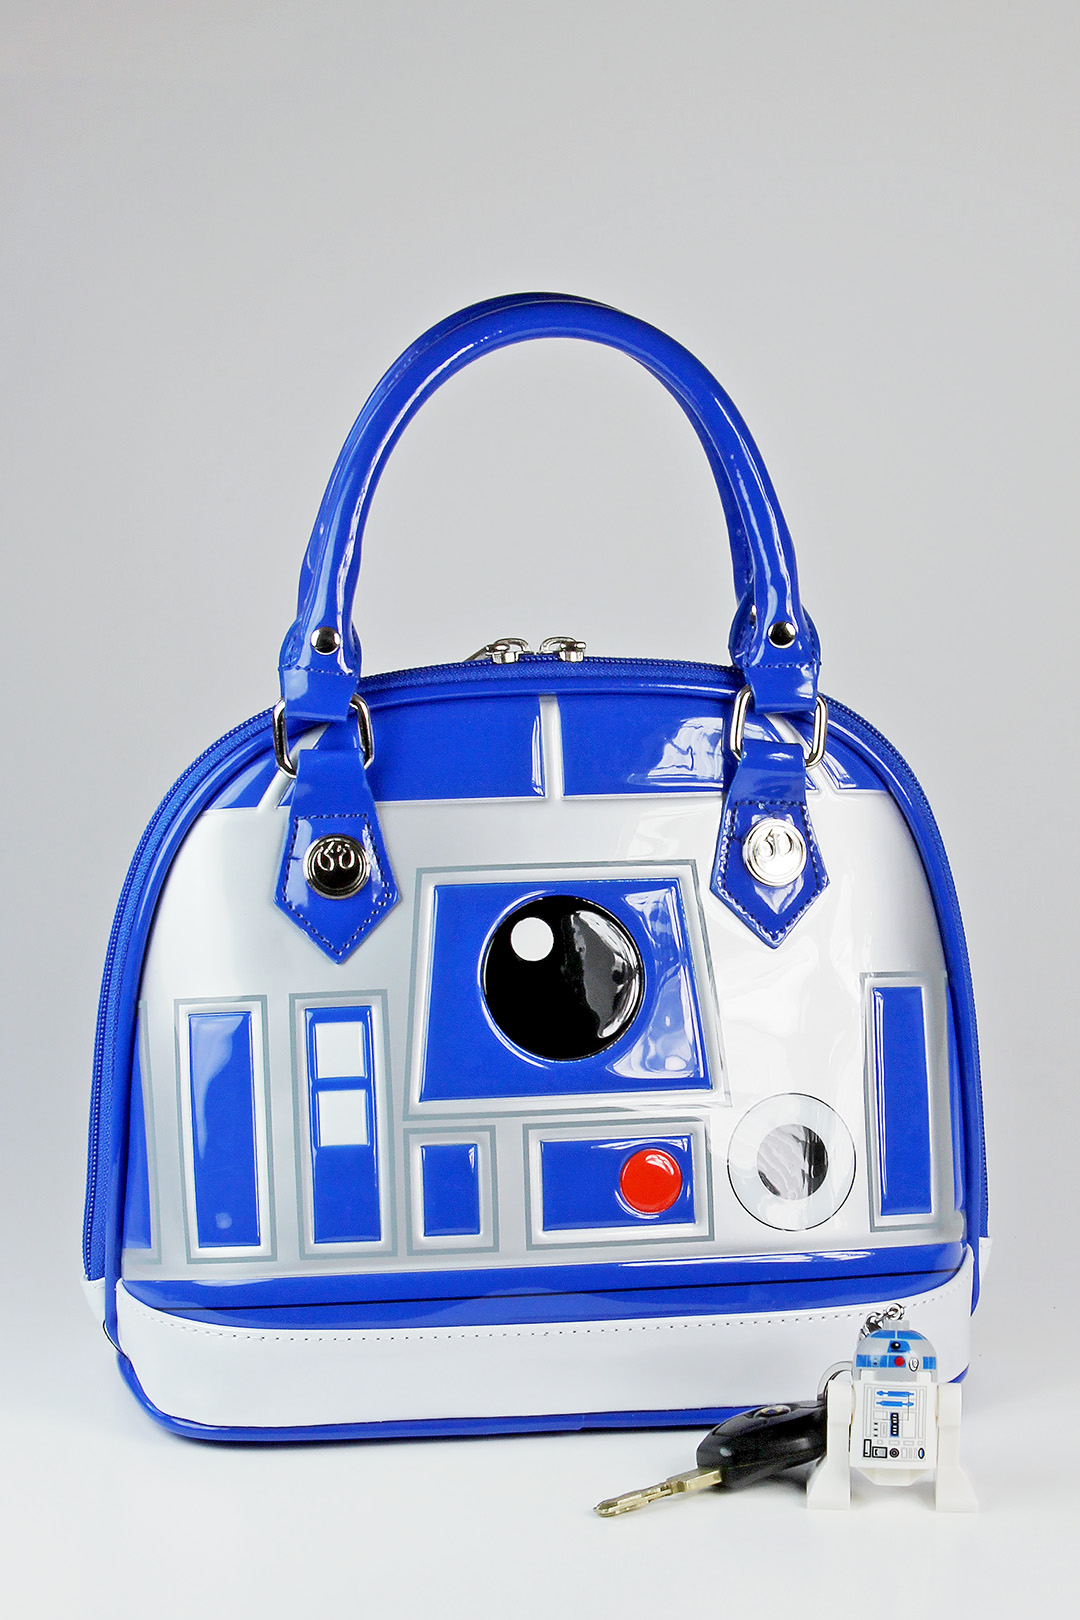 Loungefly - R2-D2 handbag (front, with Lego keychain)